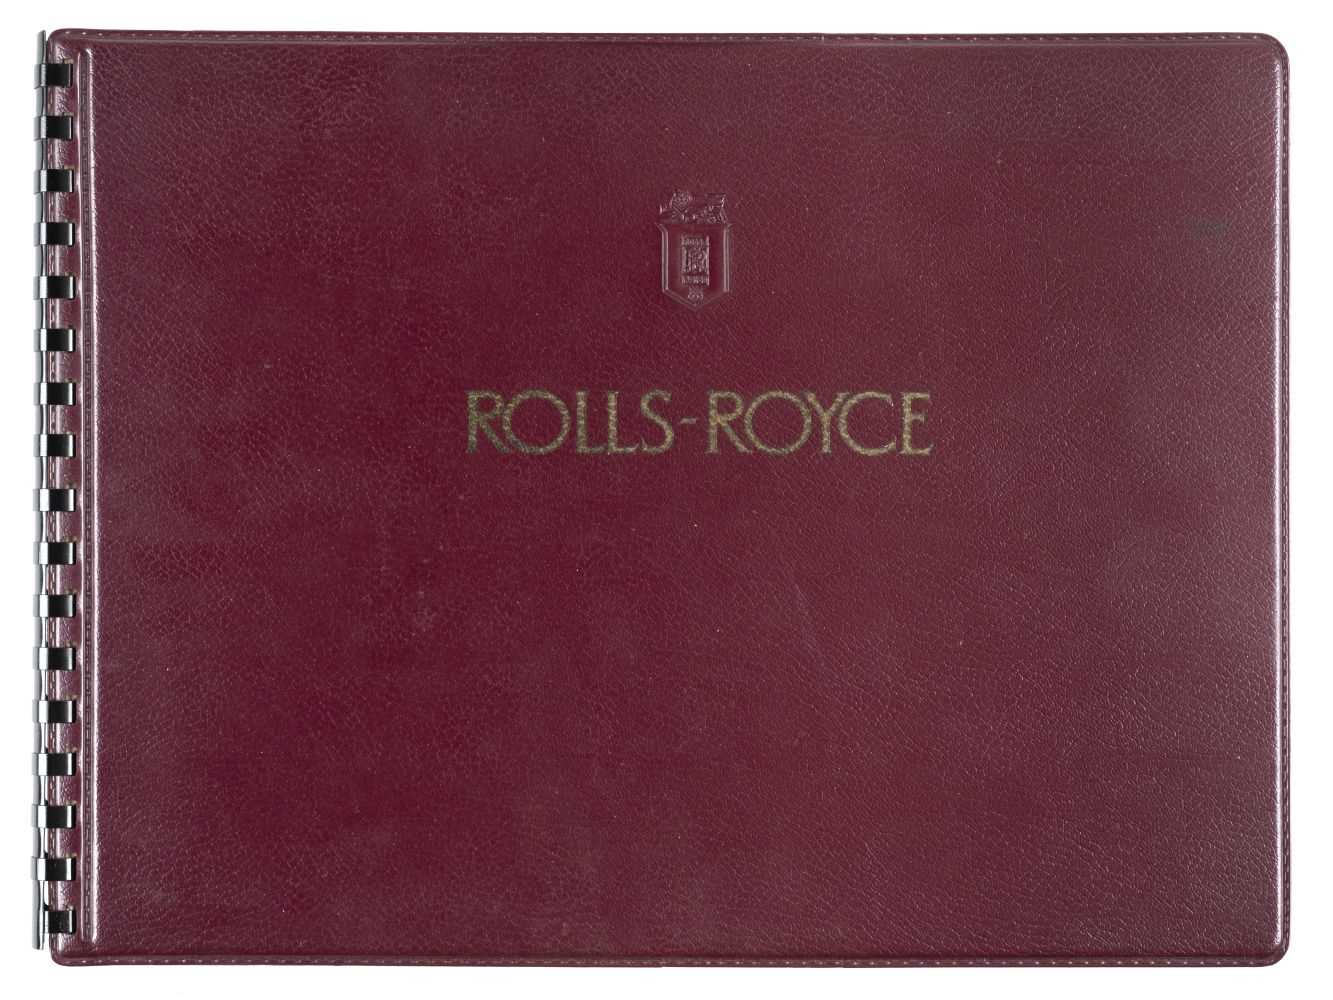 Lot 32 - Rolls-Royce. 'The Best Car in the World', Silver Cloud & Silver Wraith sales brochure, circa 1955-58